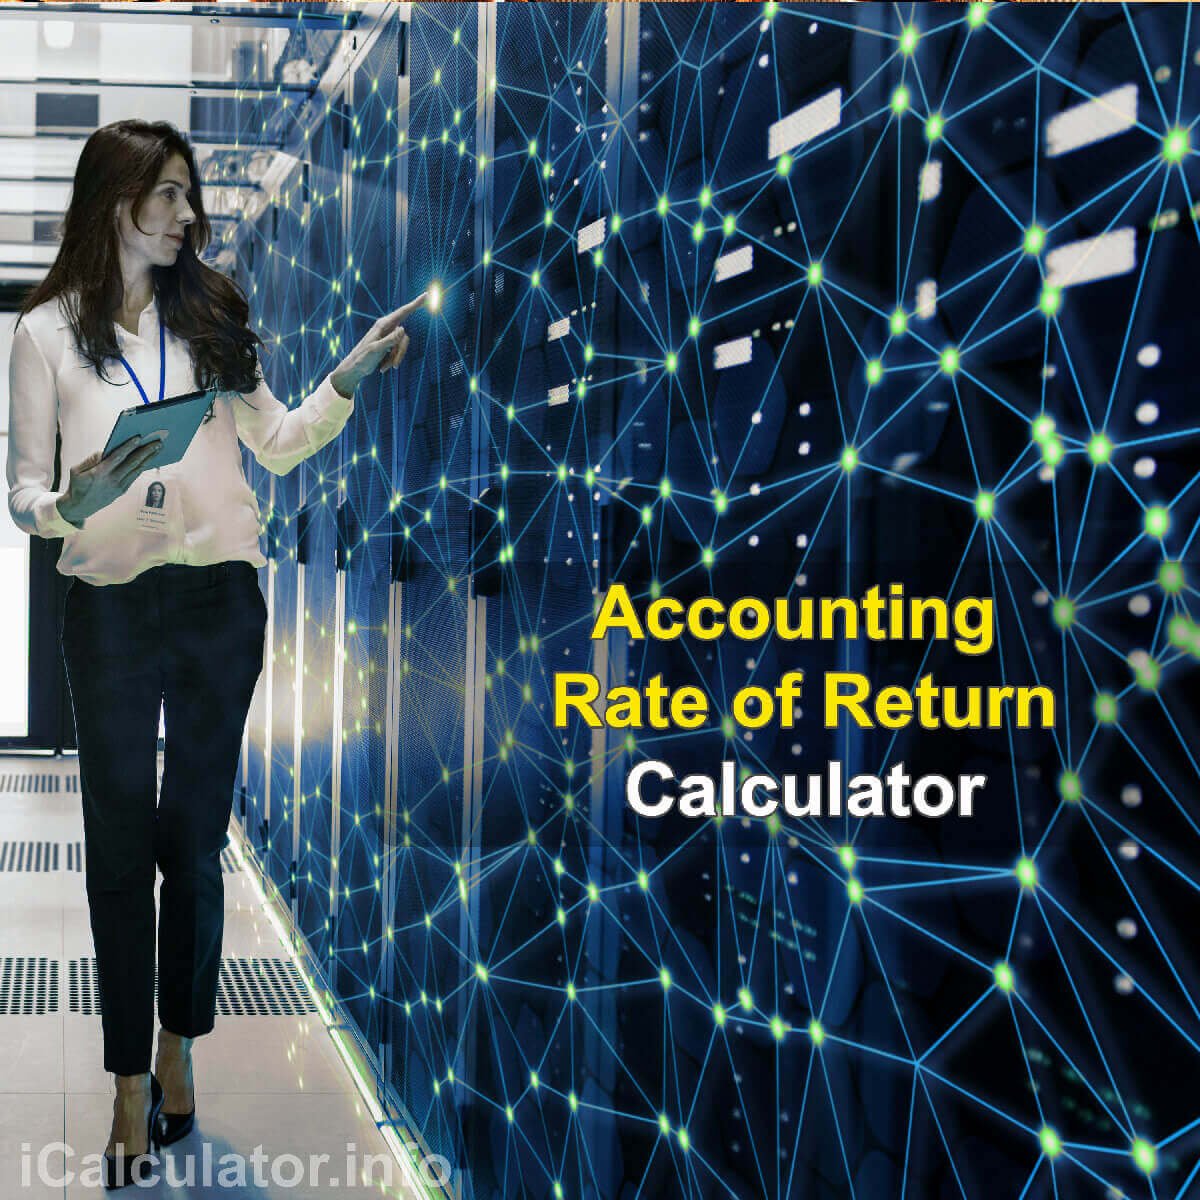 Accounting Rate of Return Calculator. This image provides details of how to calculate the Accounting Rate of Return using a calculator and notepad. By using the Accounting Rate of Return formula, the ARR Calculator provides a true calculation of the measure of return on a project investment in terms of income where income is not equivalent to cash flow.